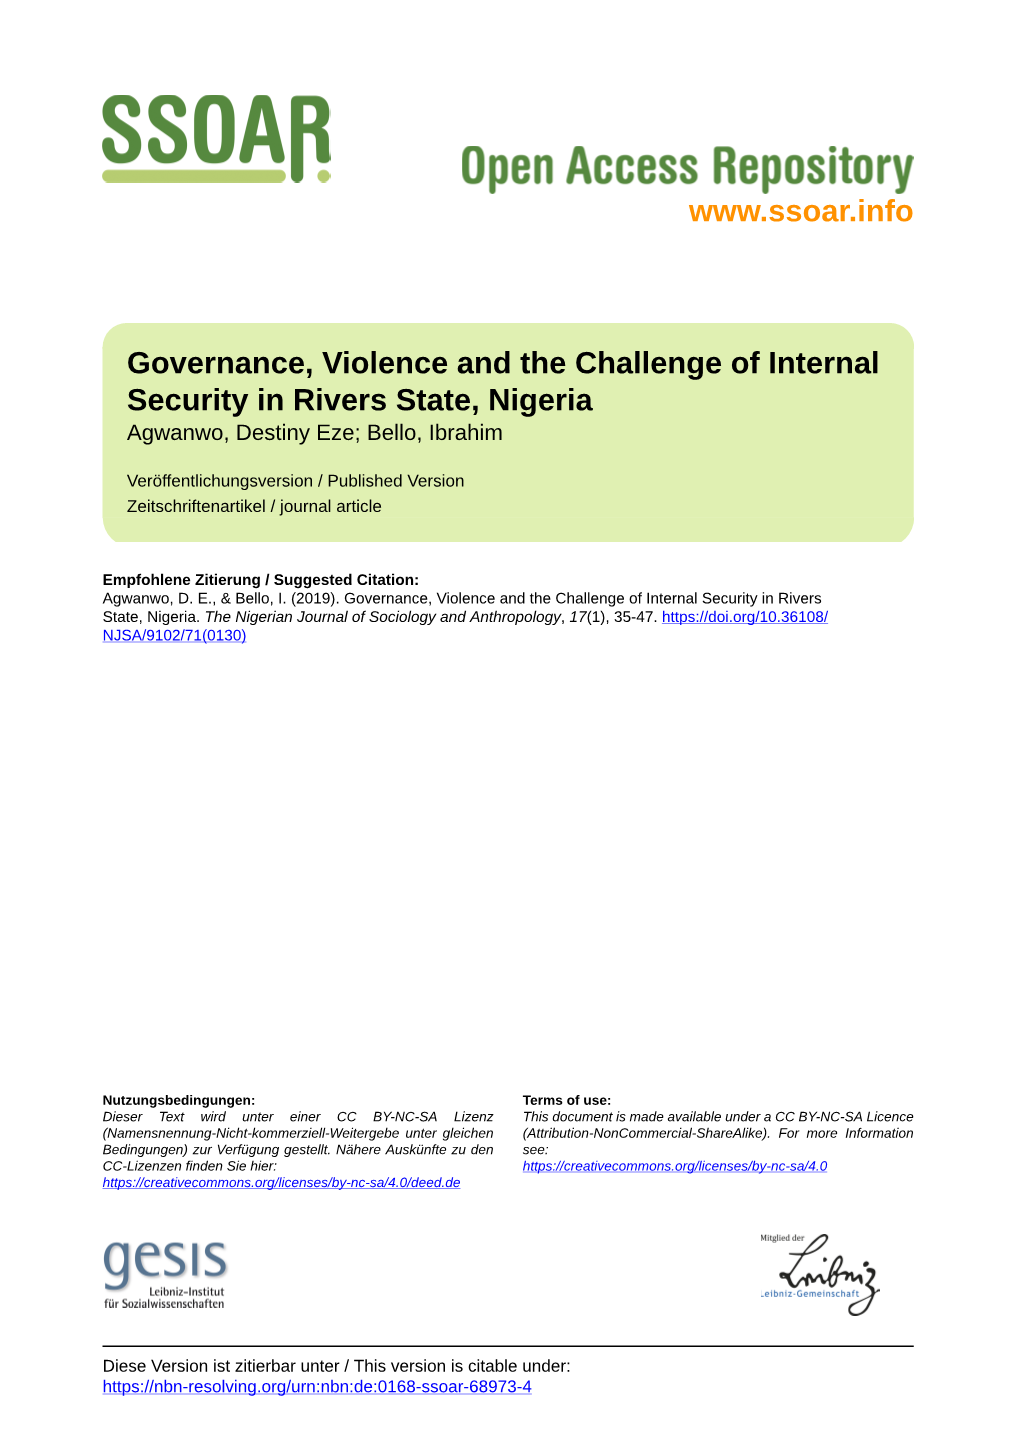 Governance, Violence and the Challenge of Internal Security in Rivers State, Nigeria